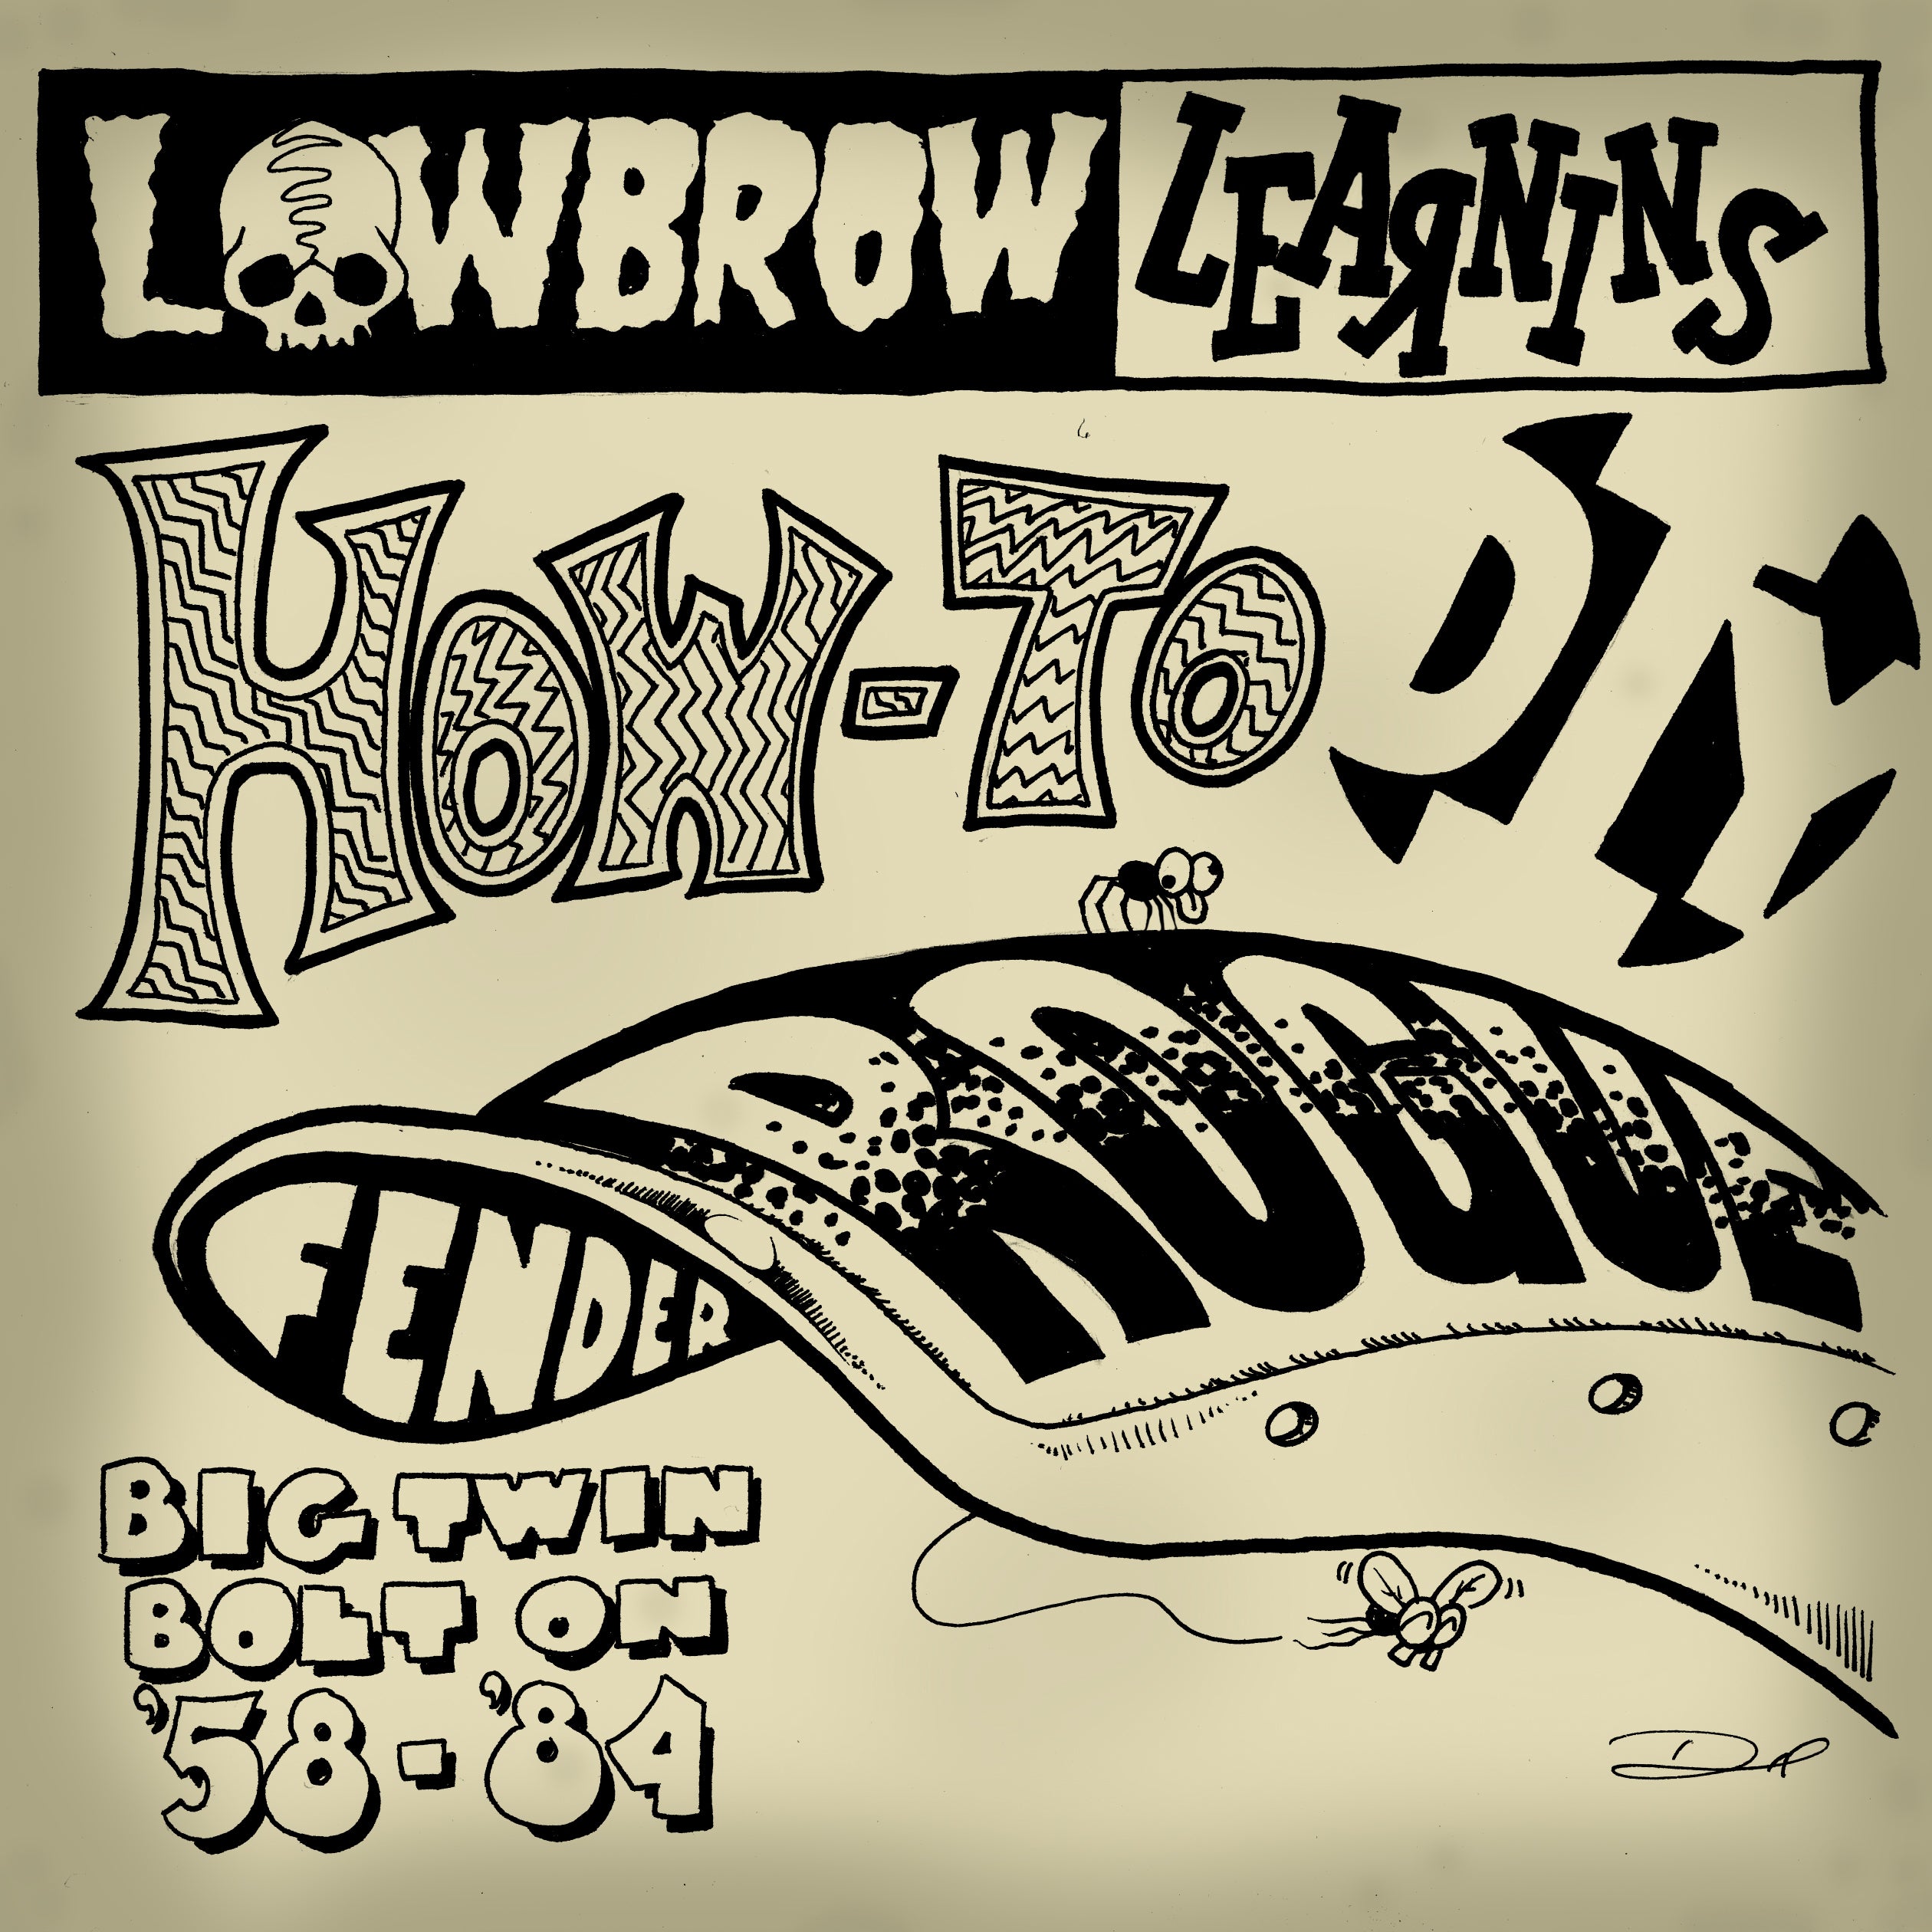 Lowbrow Learnins: How-To DIY Rogue Fender Harley Big Twin Bolt-On '58-'84-2